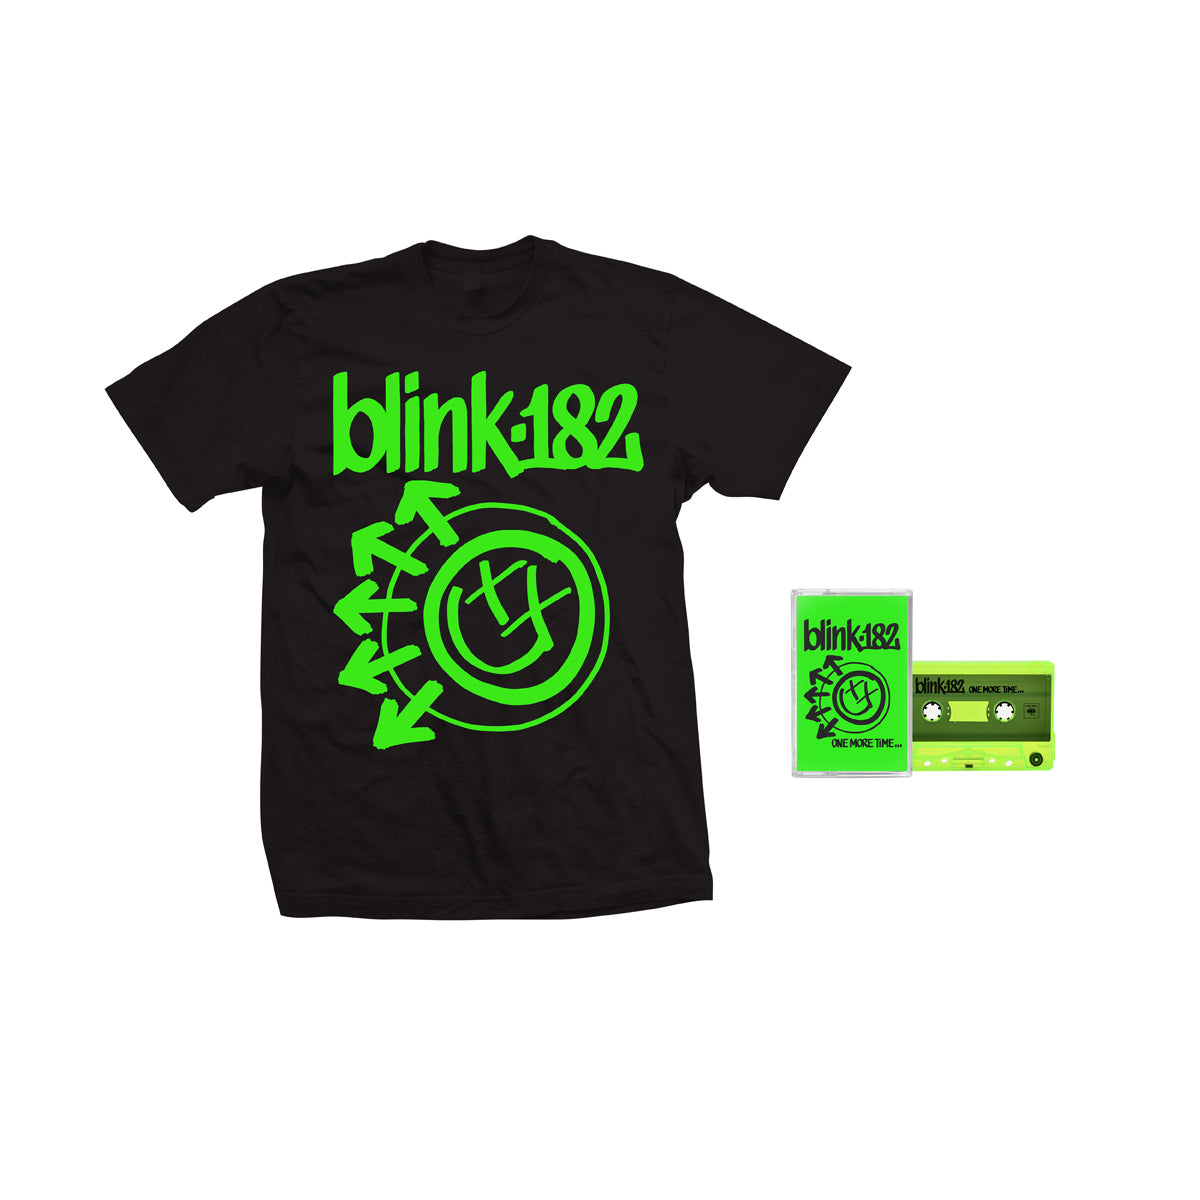 ONE MORE TIME... Green Logo Tee + Cassette